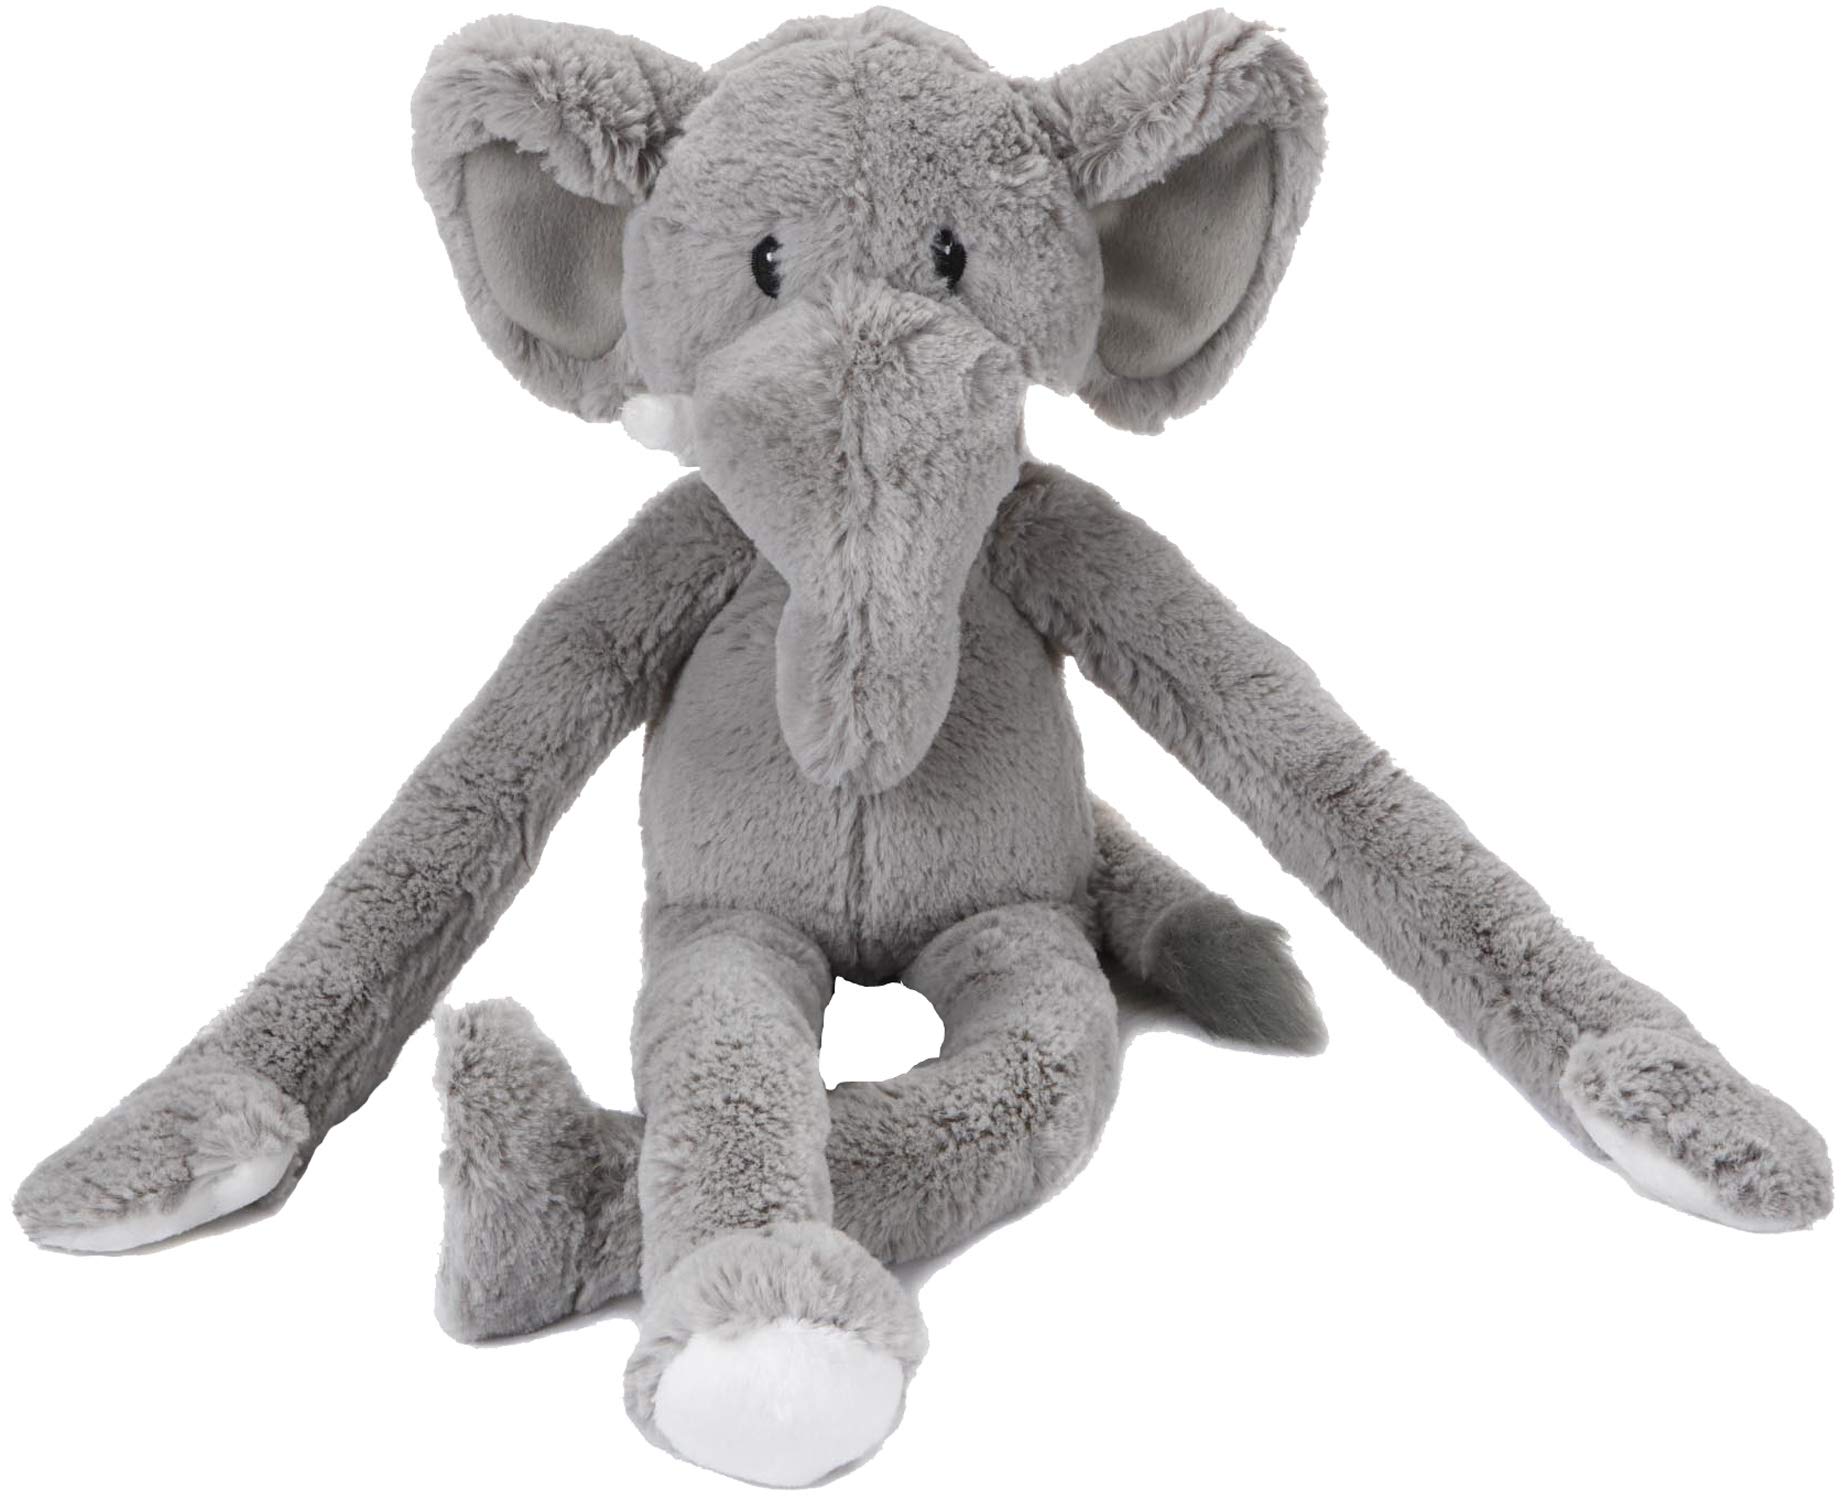 Book Cover Swingin Safari 19-Inch Large Plush Dog Toy with Extra Long Arms and Legs with Squeakers Elephant 19